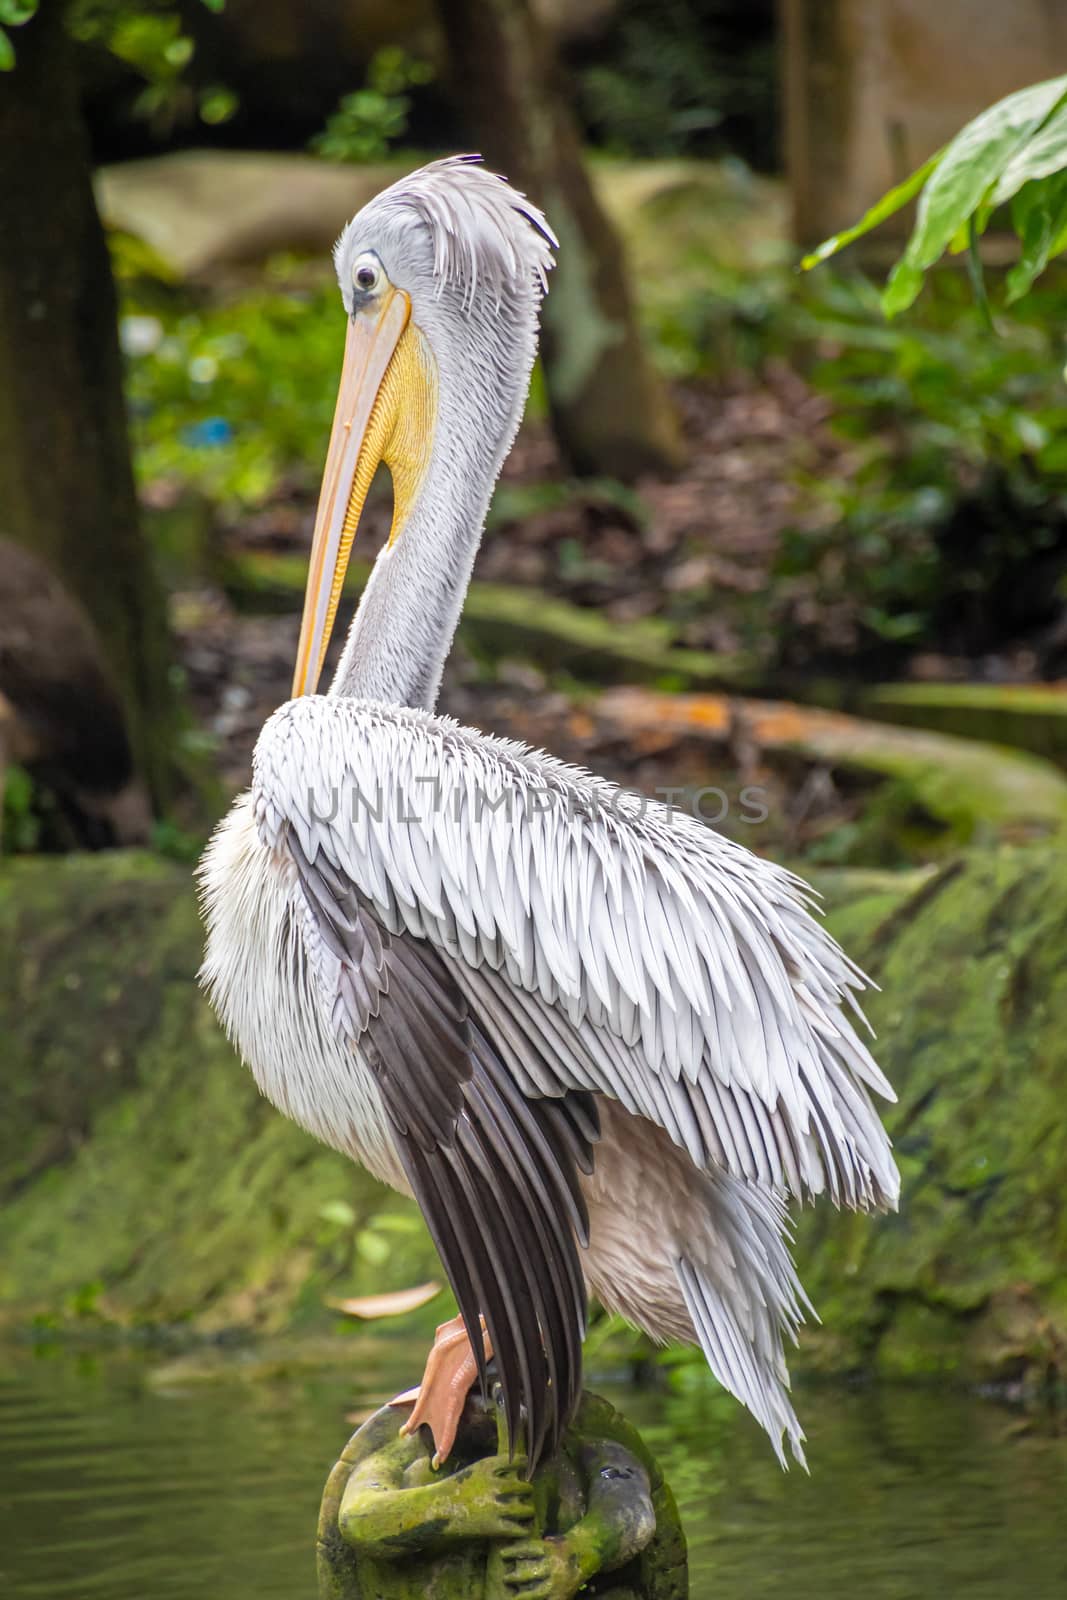 Pelican with wet feathers and long tail resting on sculpture in park